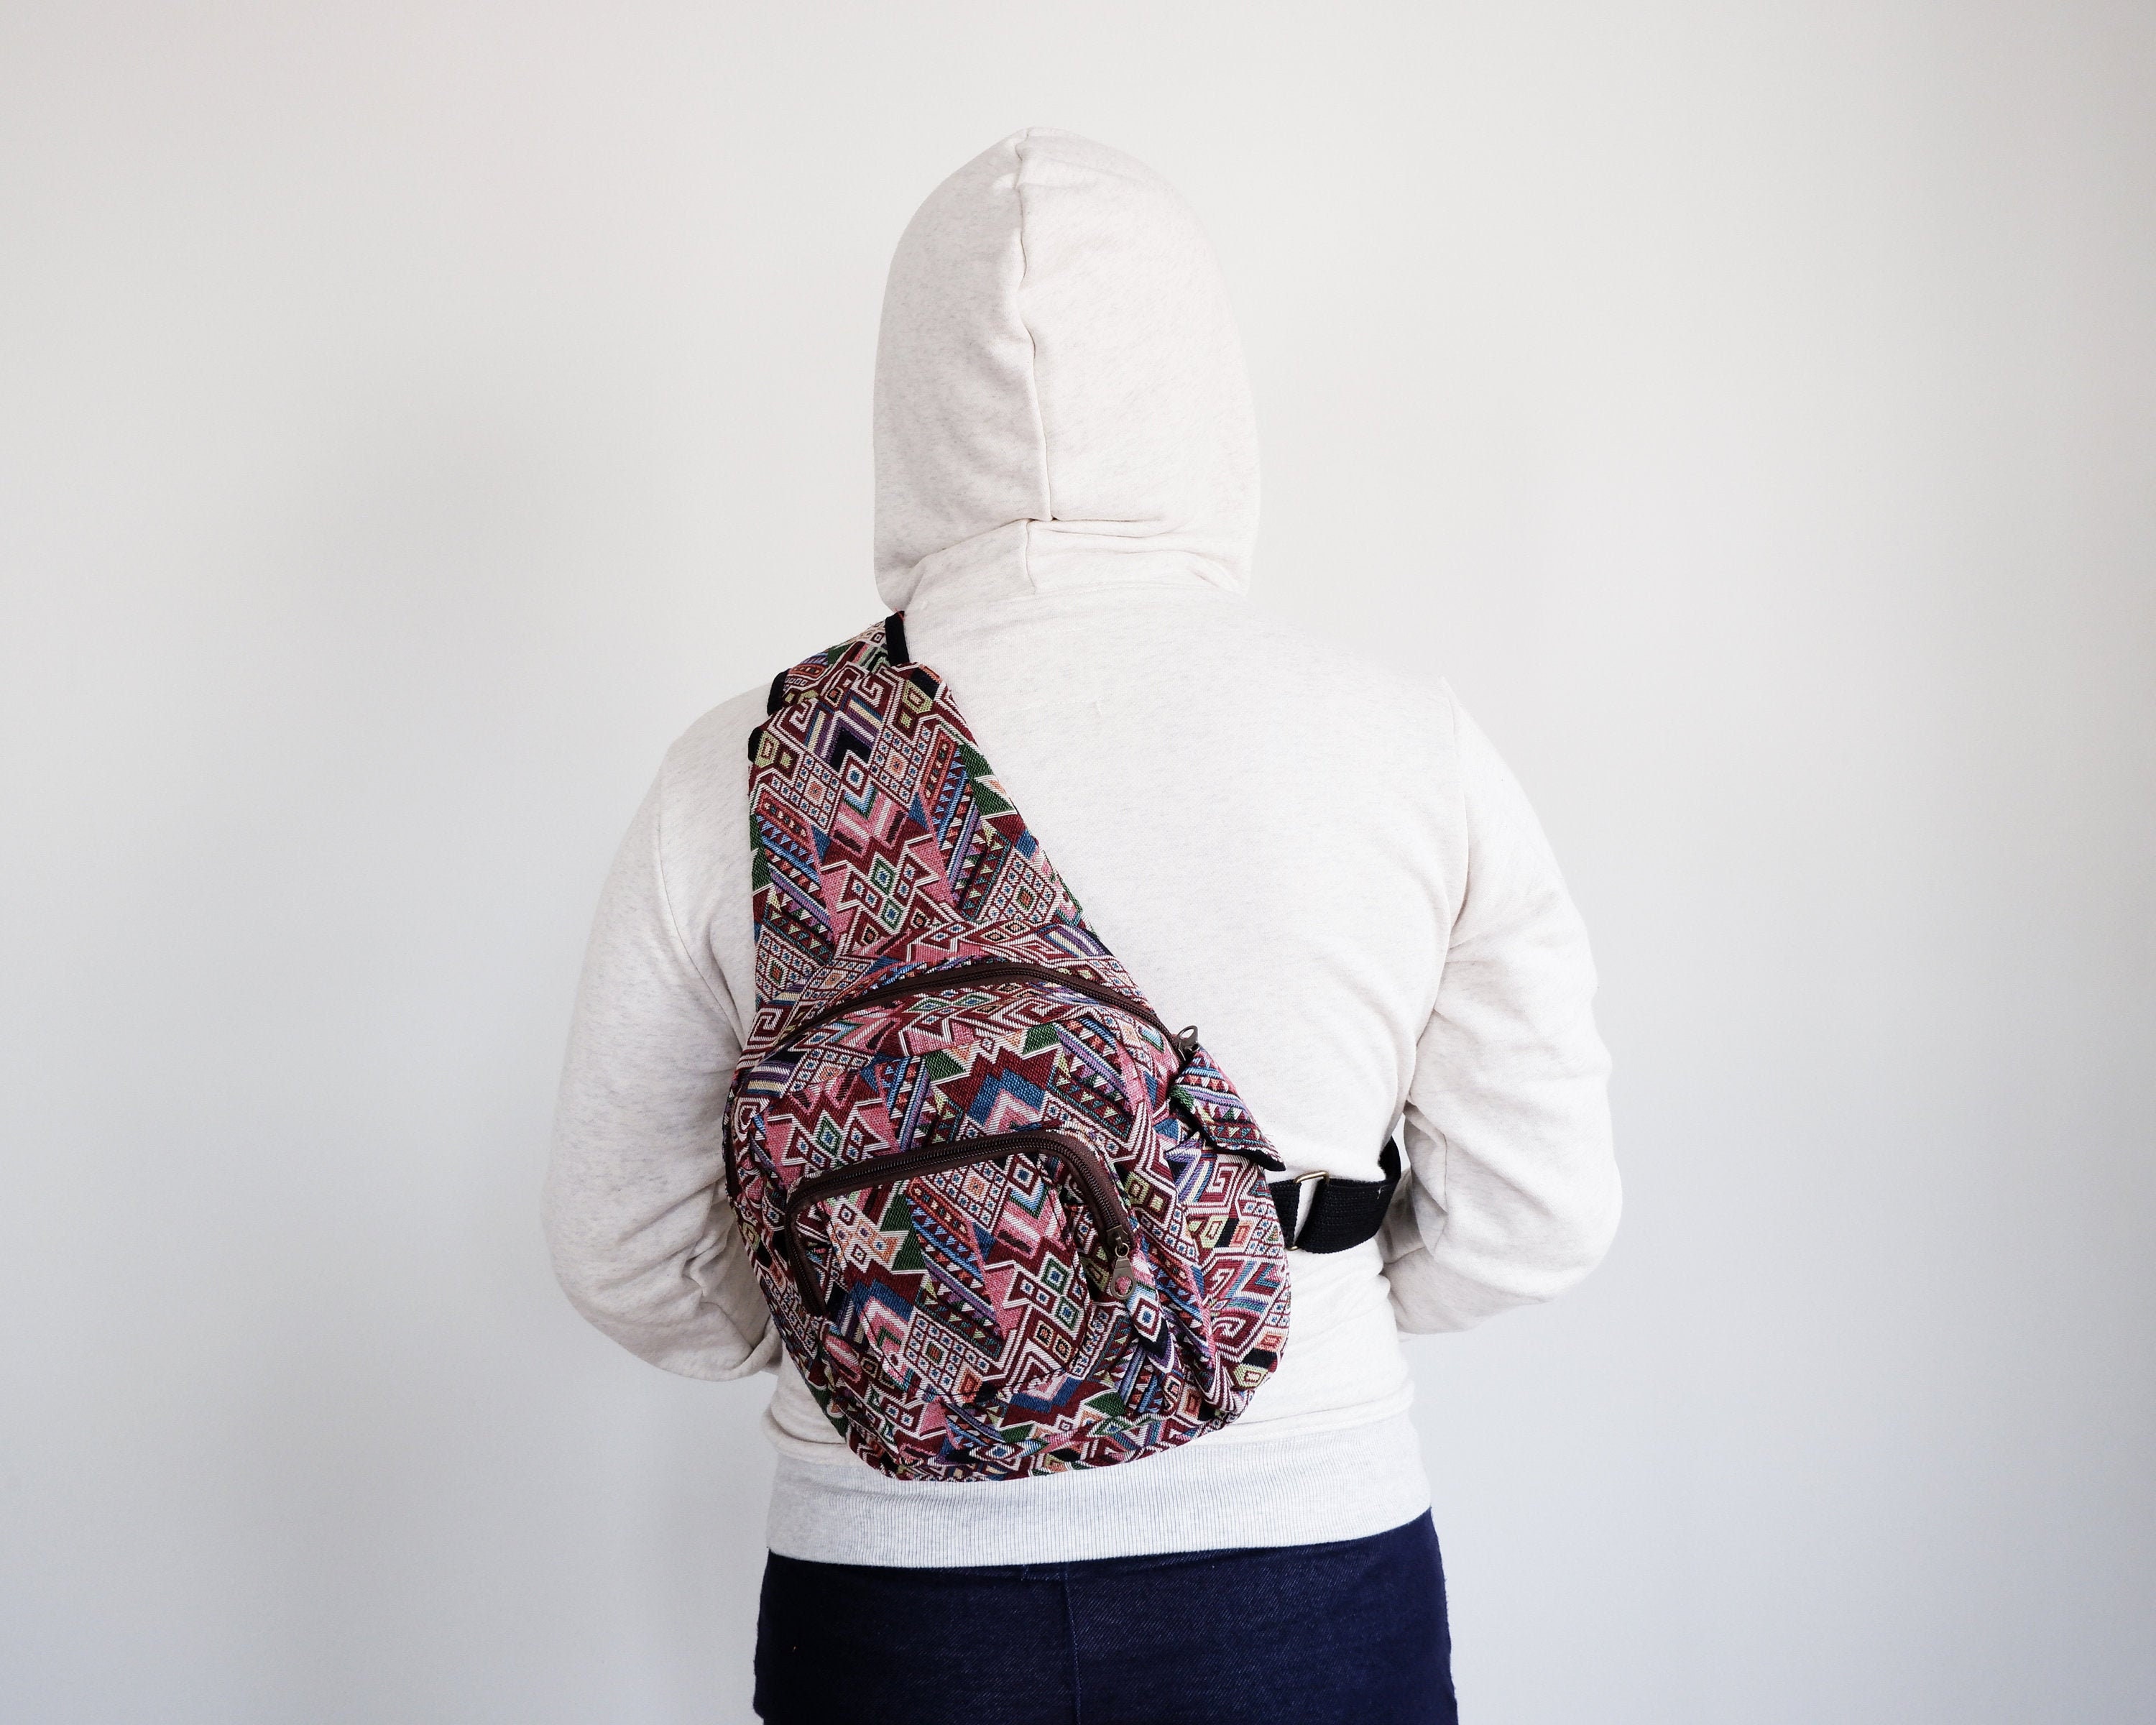 Lauw Boost groei Aztec backpack - Etsy Nederland